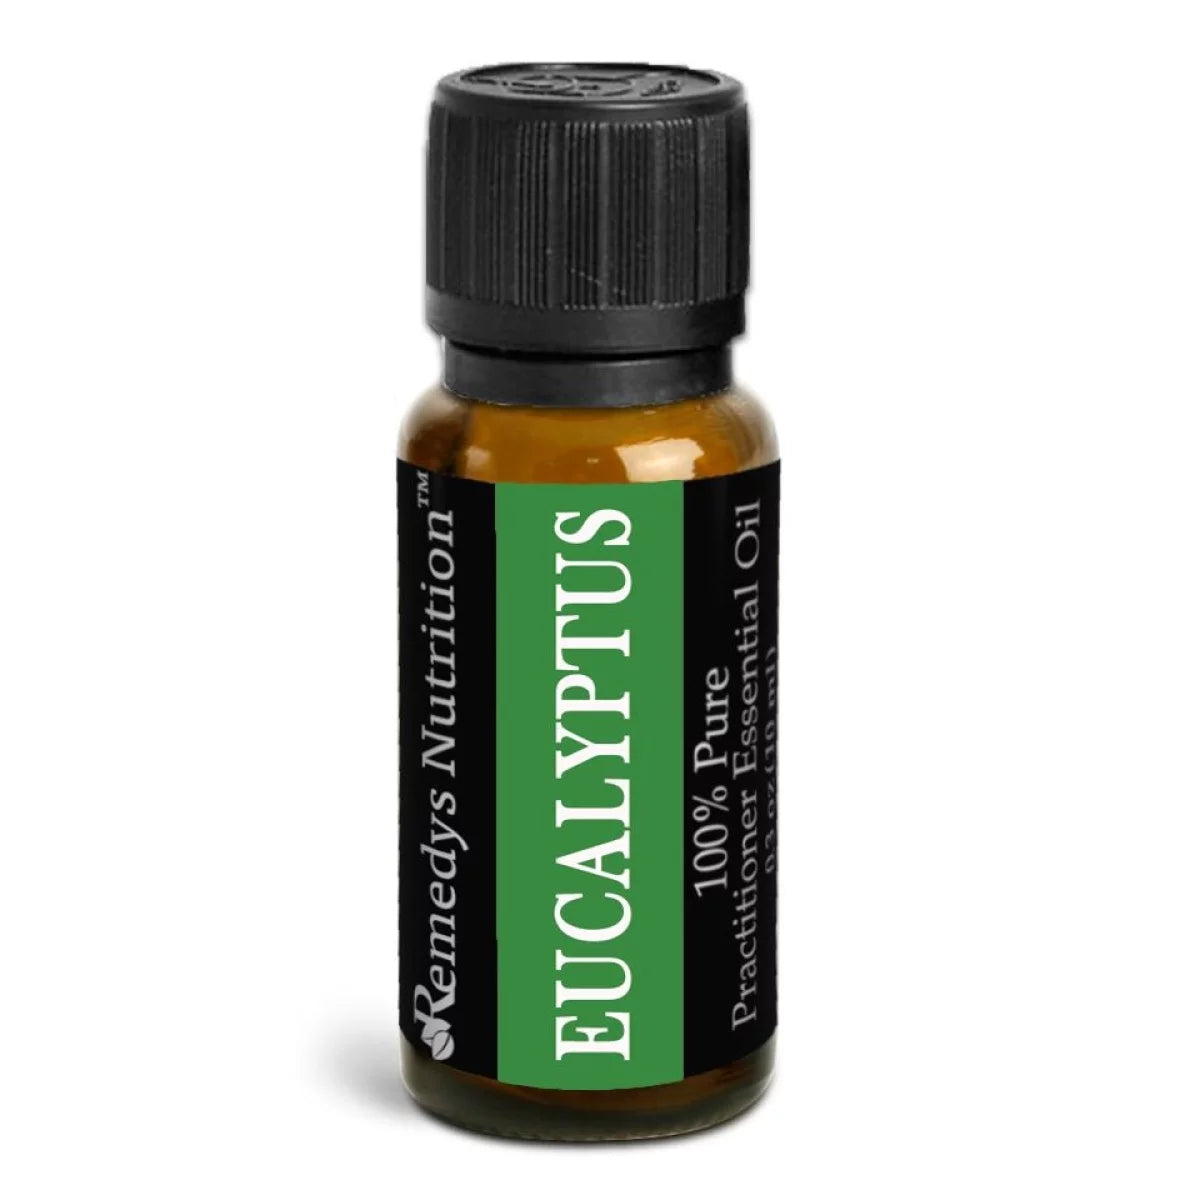 Image of Remedy's Nutrition® Eucalyptus Essential Oil Herbal Supplement front bottle.